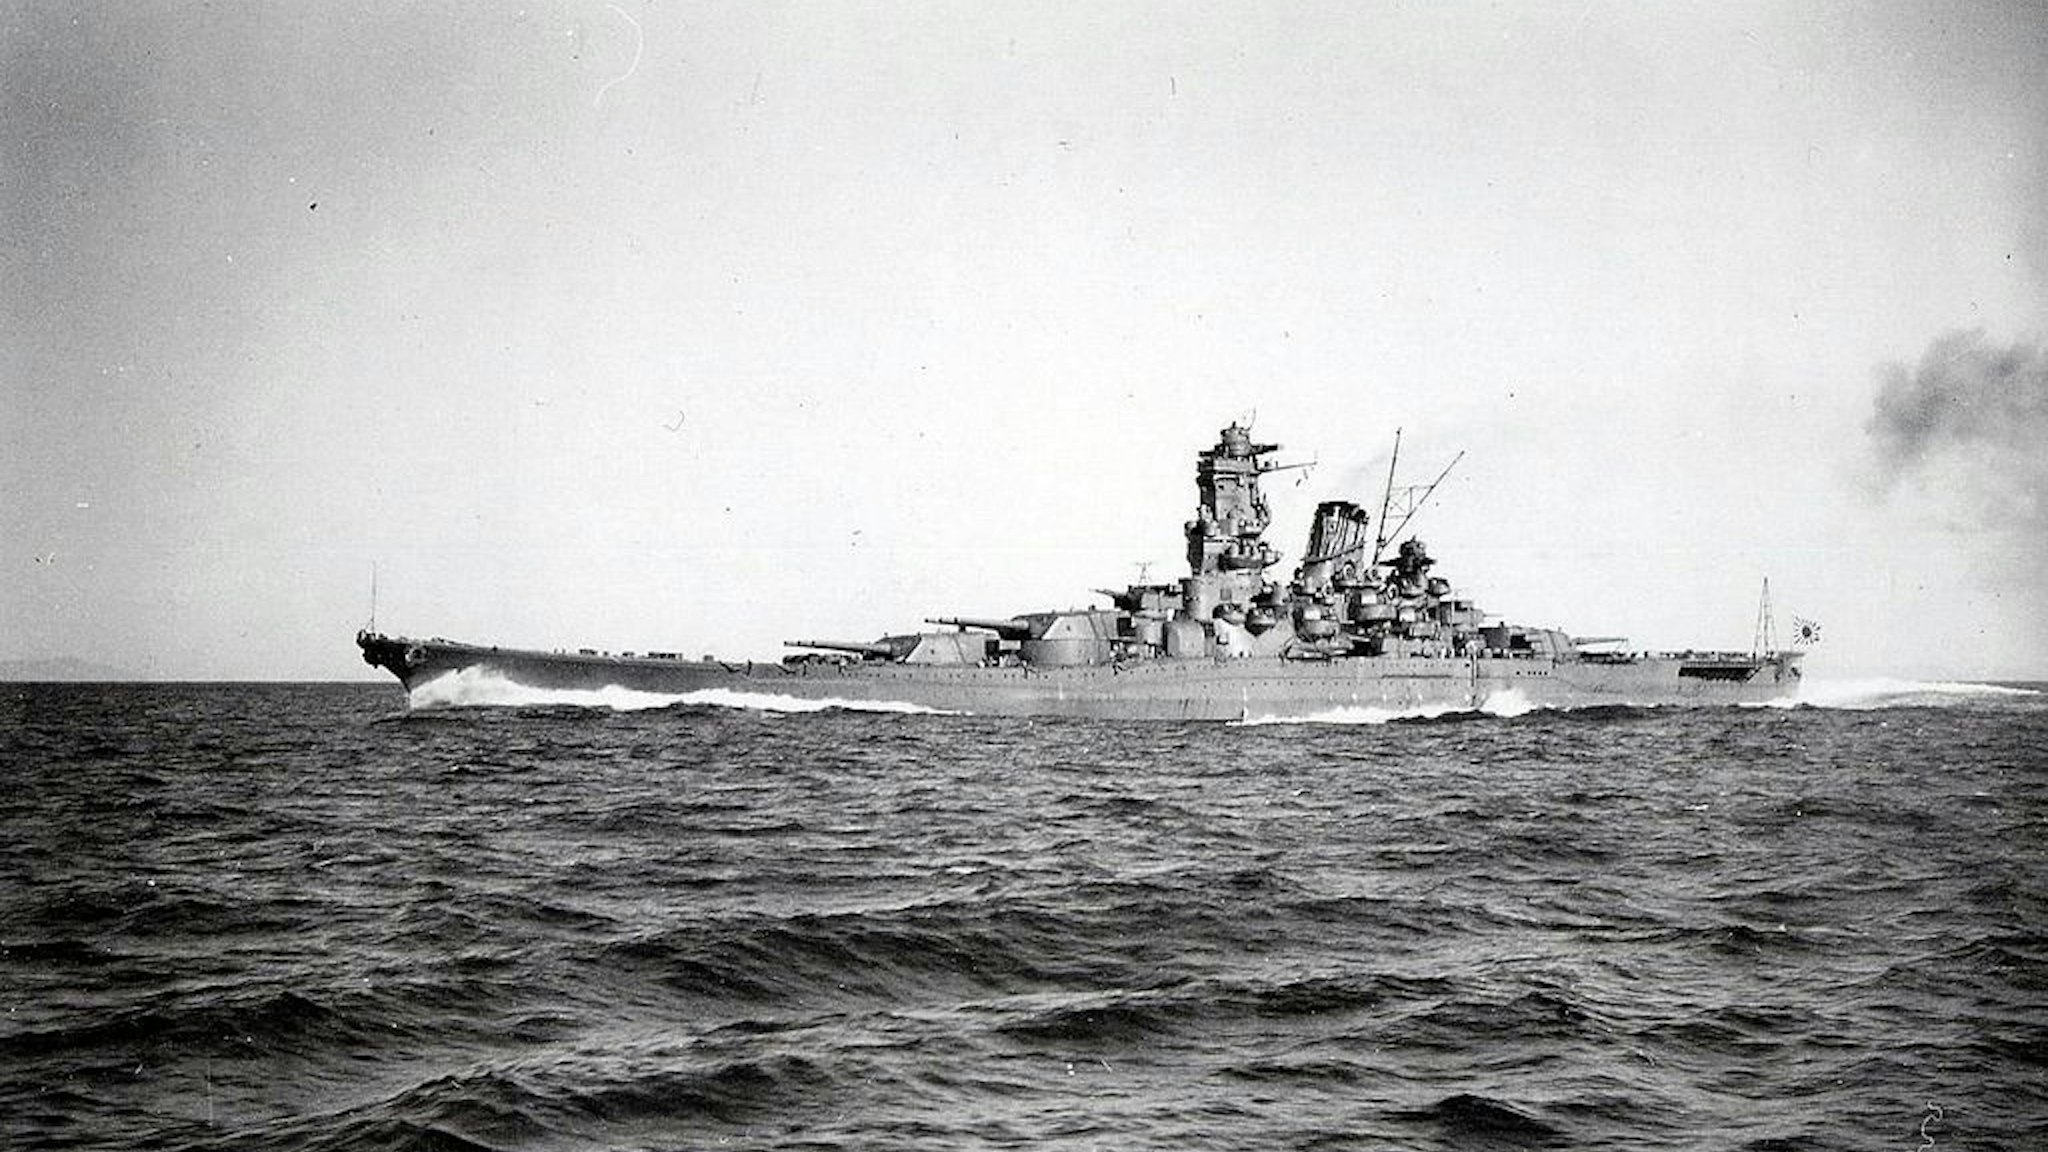 Photograph of the IJN Yamato the lead ship of the Yamato class of battleships that served with the Imperial Japanese Navy during World War II. Dated 1941